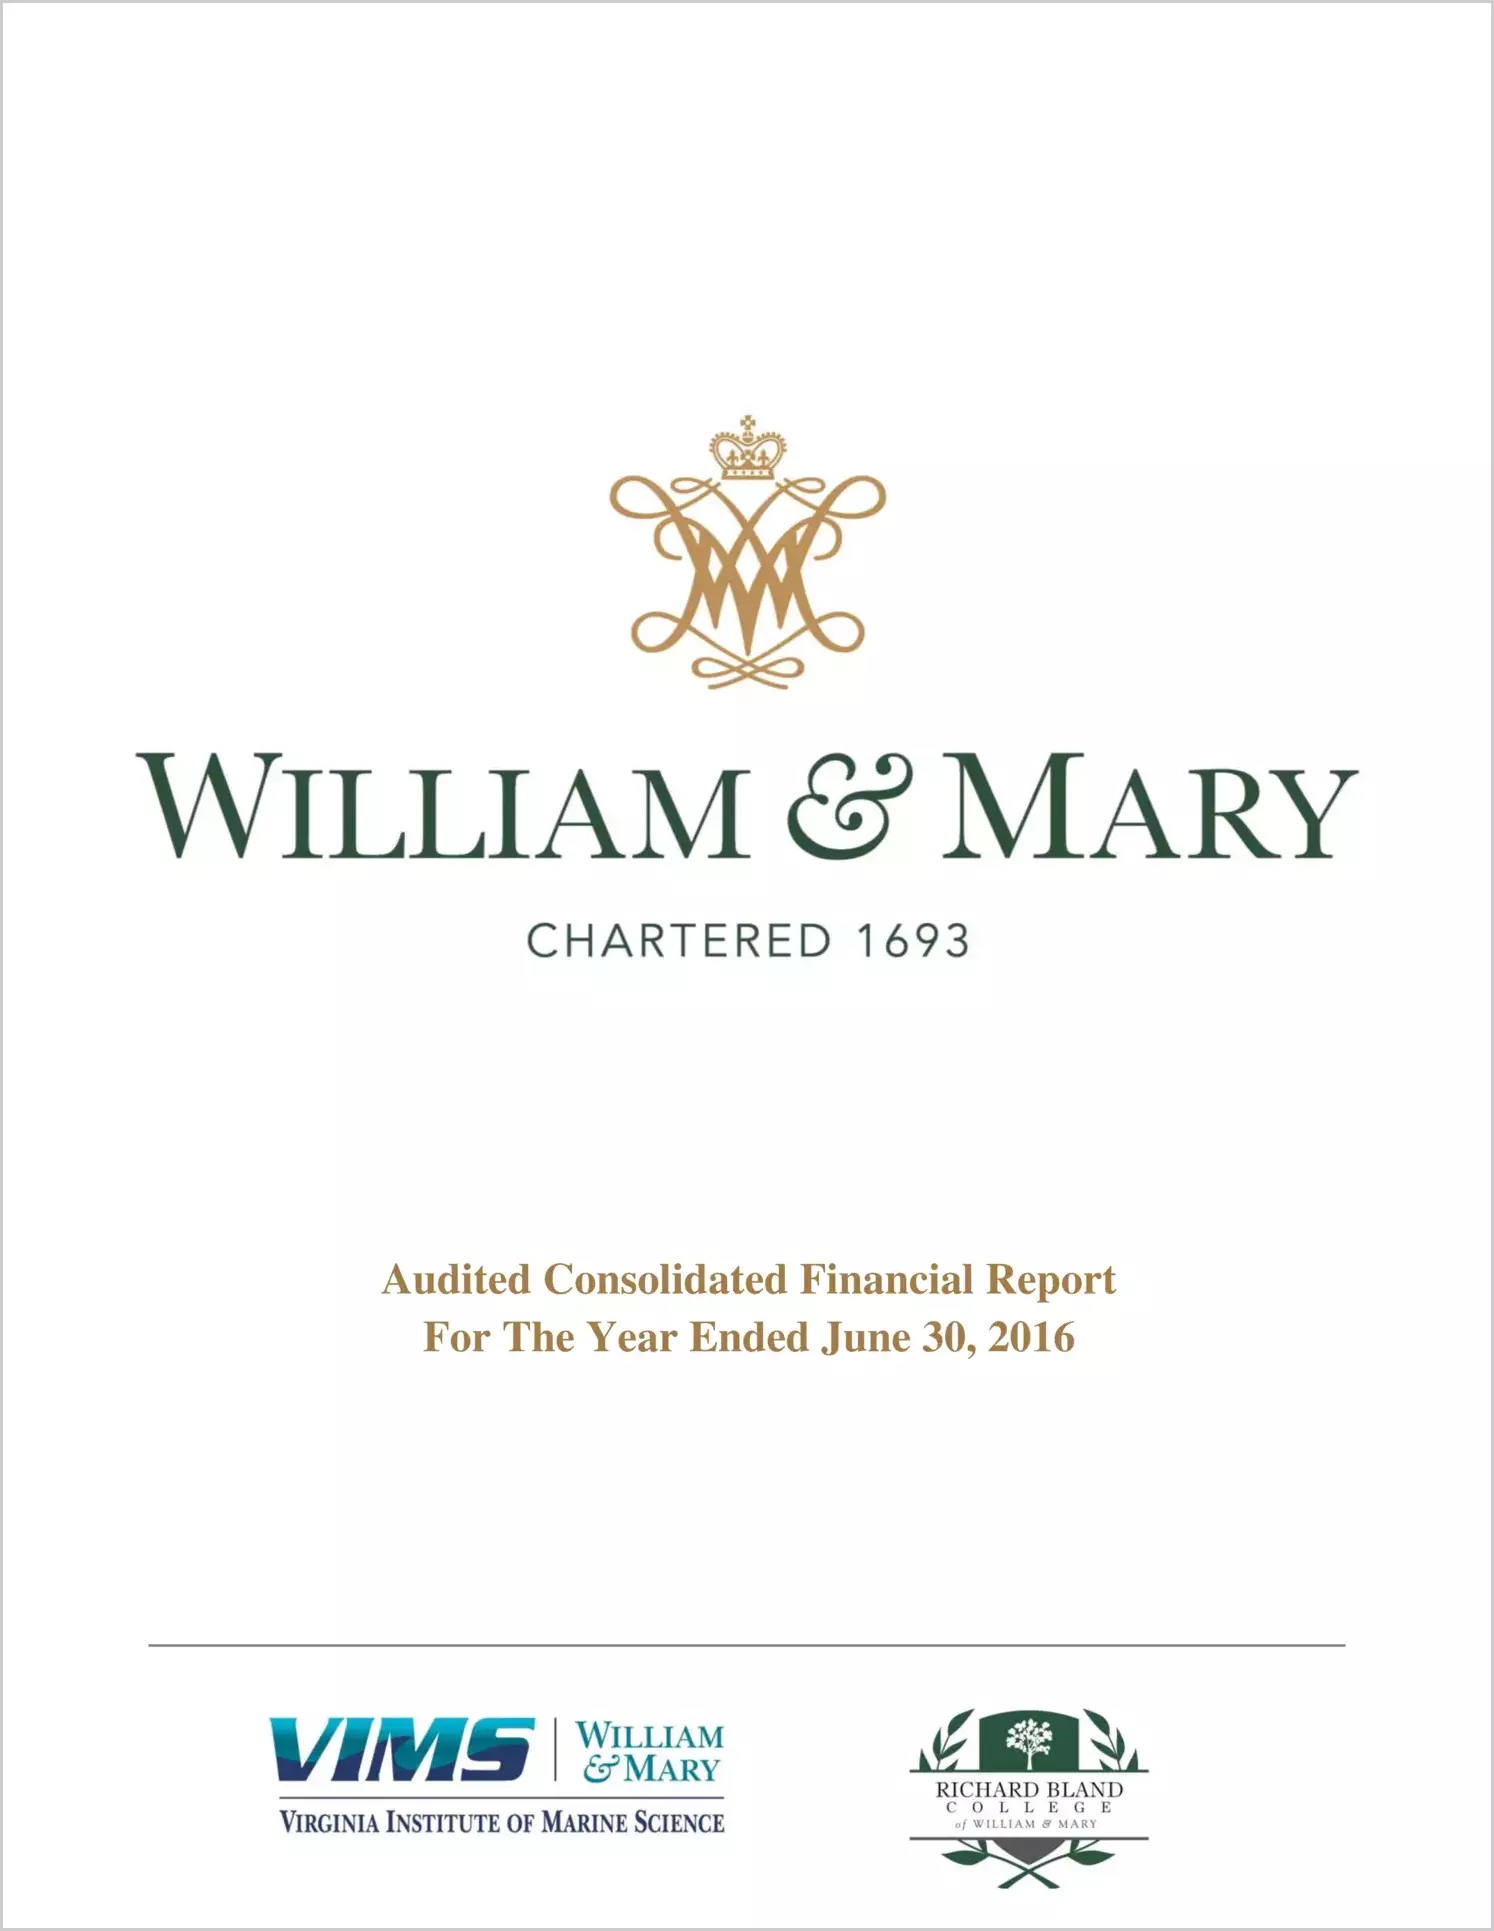 William & Mary, Virginia Institute of Marine Science, and Richard Bland College Financial Statements for the year ended June 30, 2016